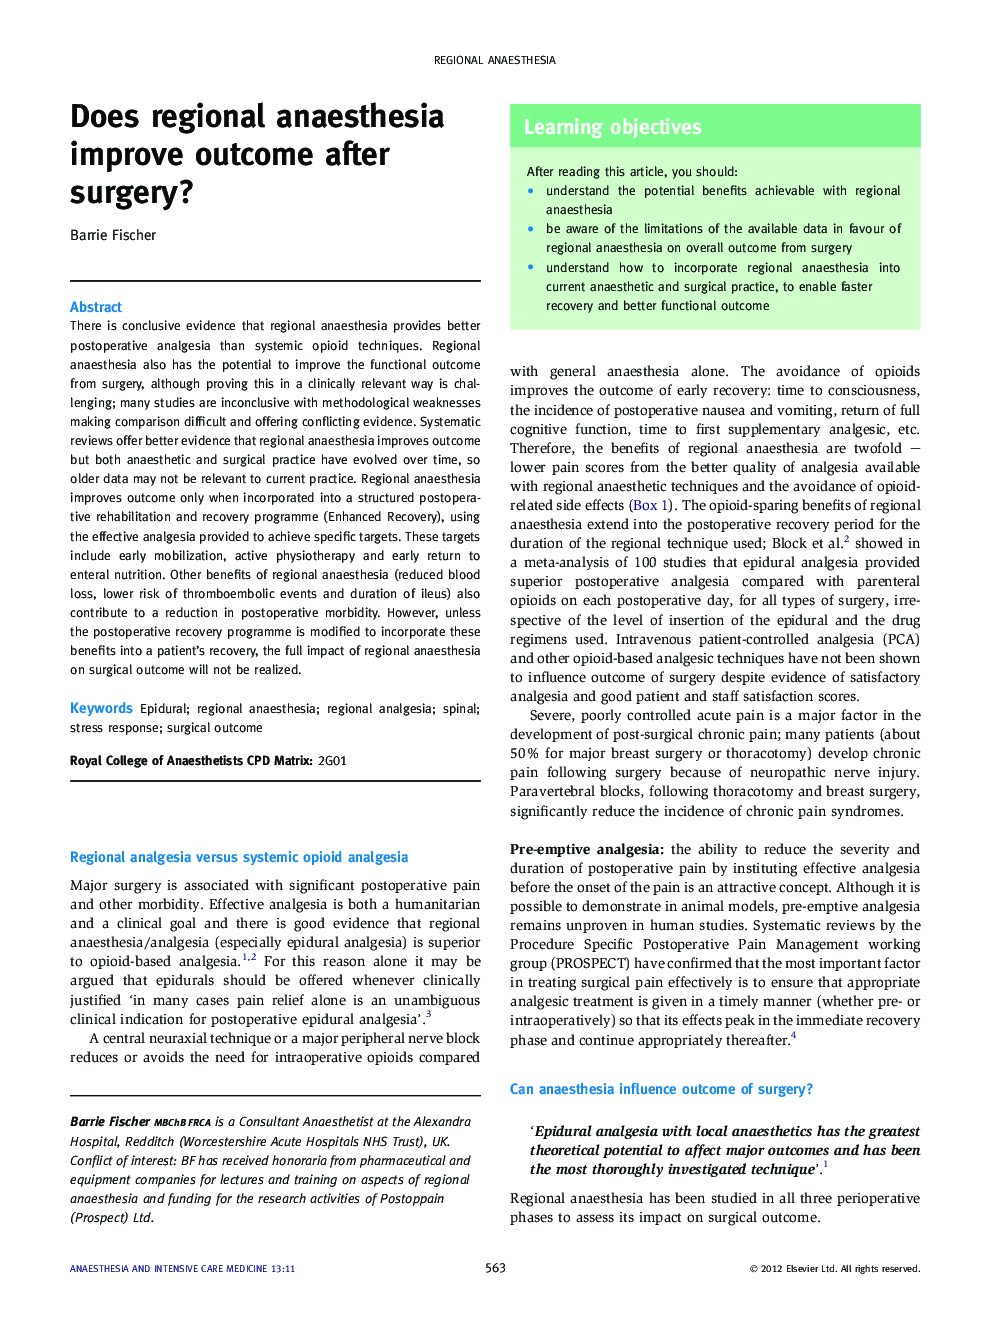 Does regional anaesthesia improve outcome after surgery?